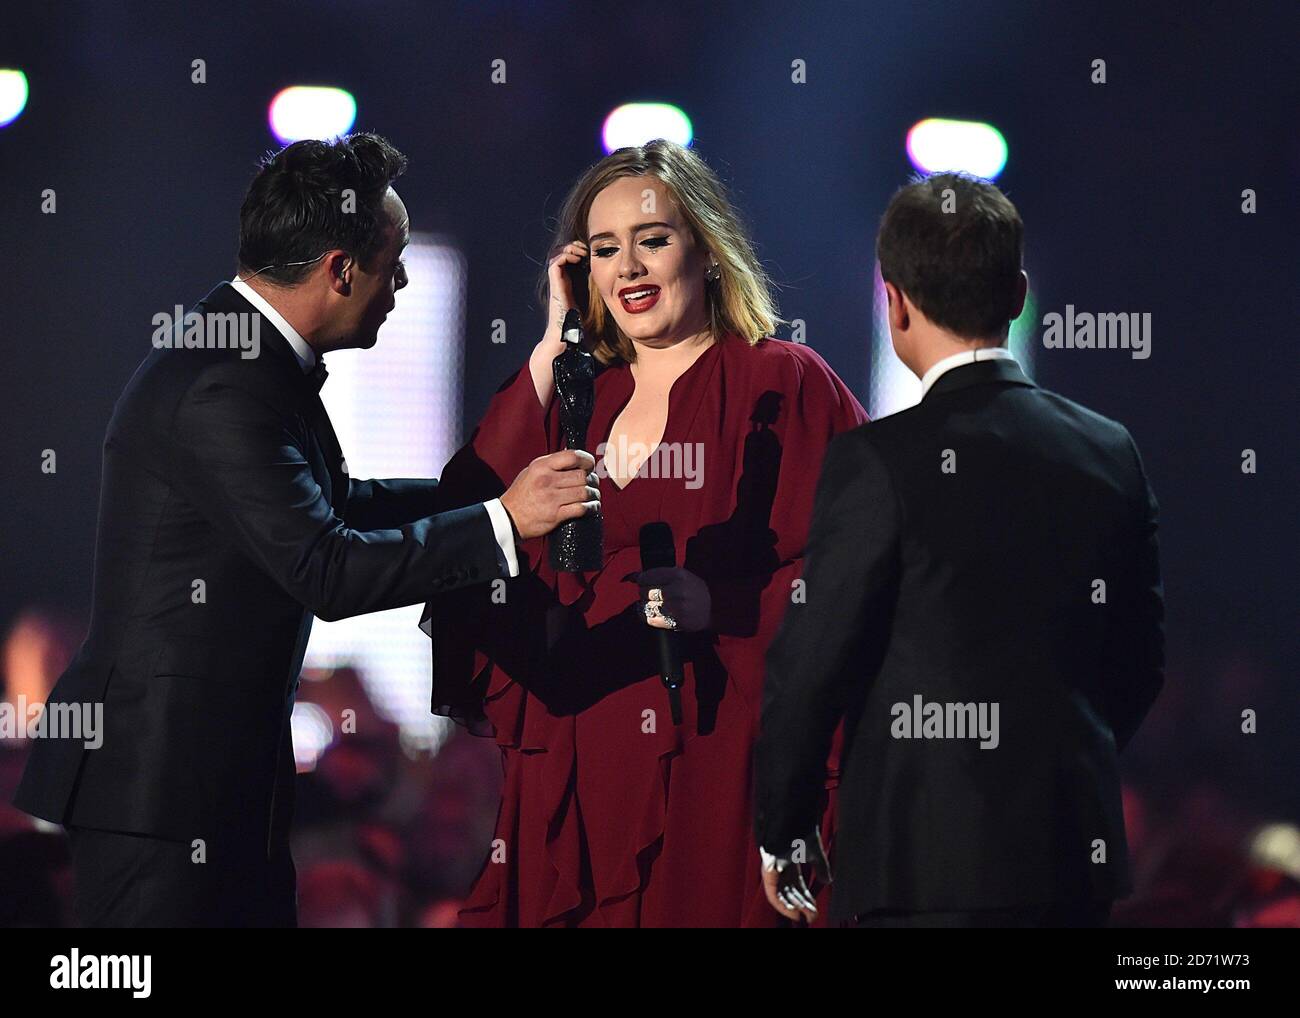 Adele collects the Global Success Award from Ant and Dec on stage during the 2016 Brit Awards at the O2 Arena, London. Stock Photo